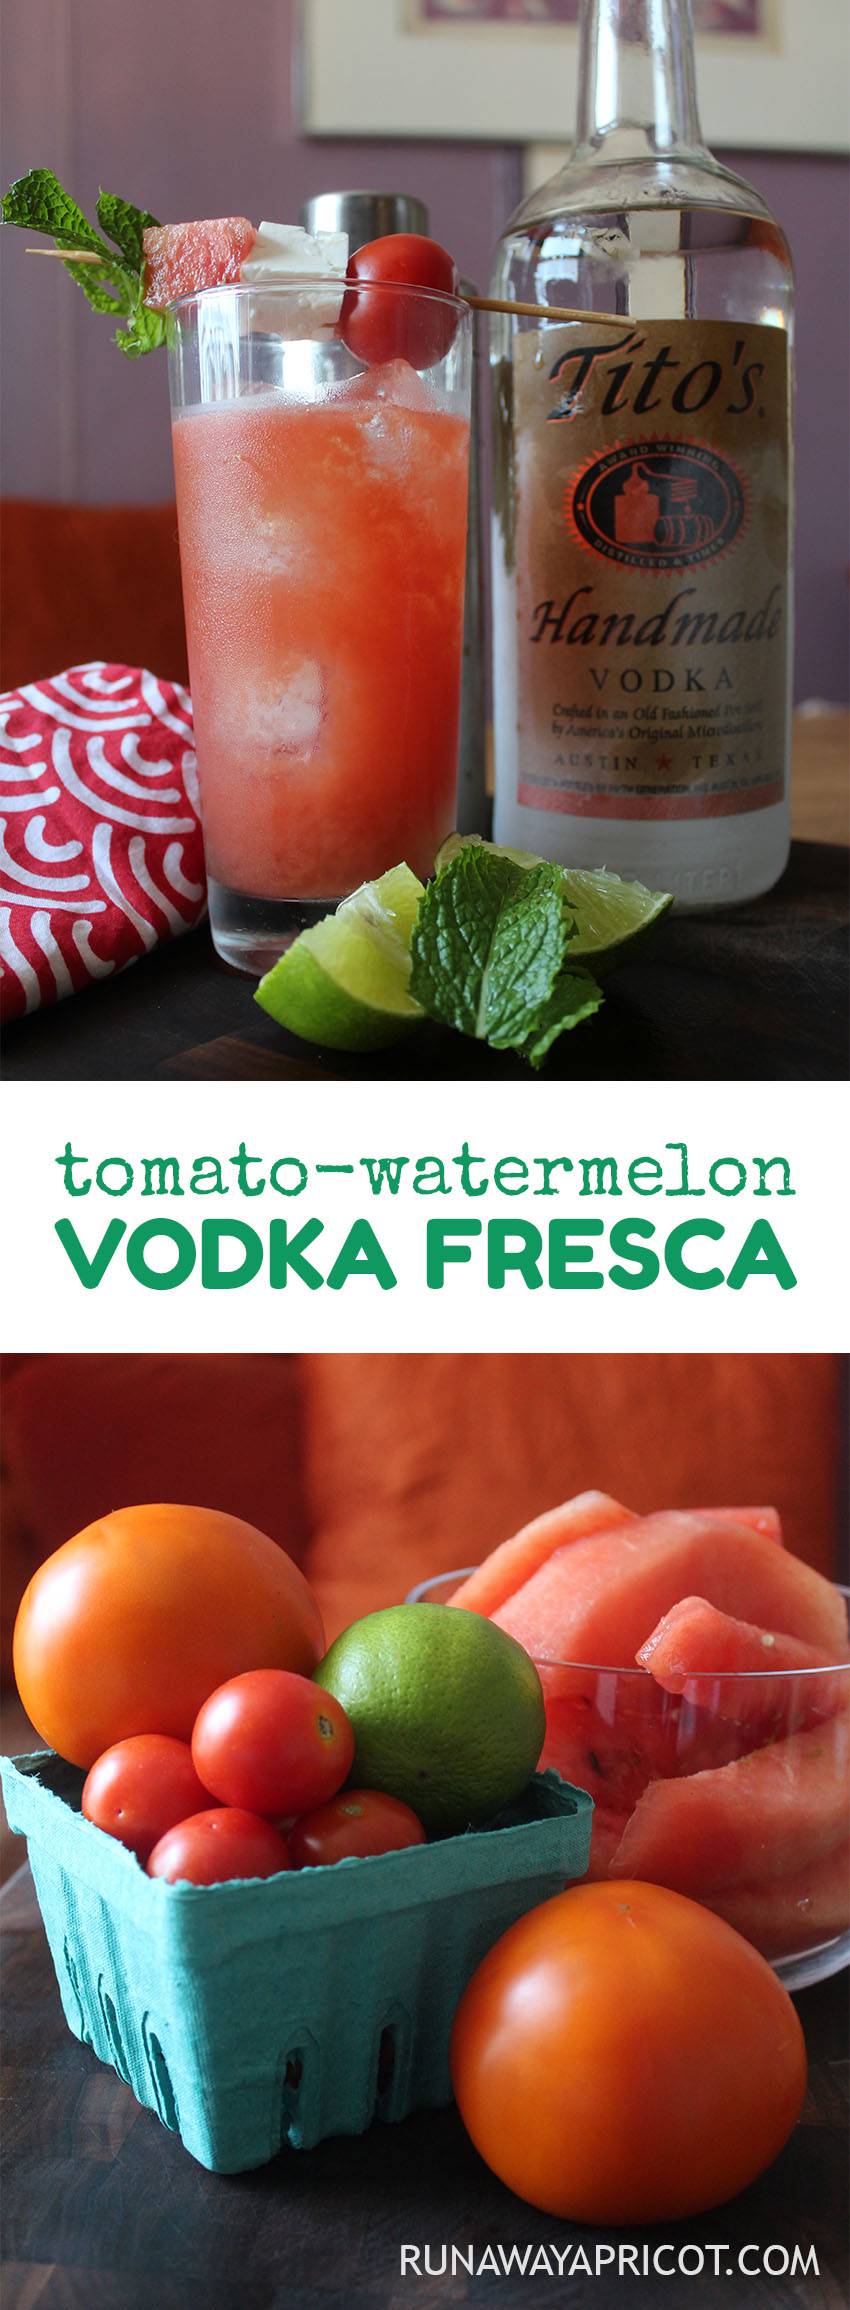 Tomato-Watermelon Vodka Fresca. A refreshing summer cocktail of fresh fruit for a lighter take on the bloody Mary.